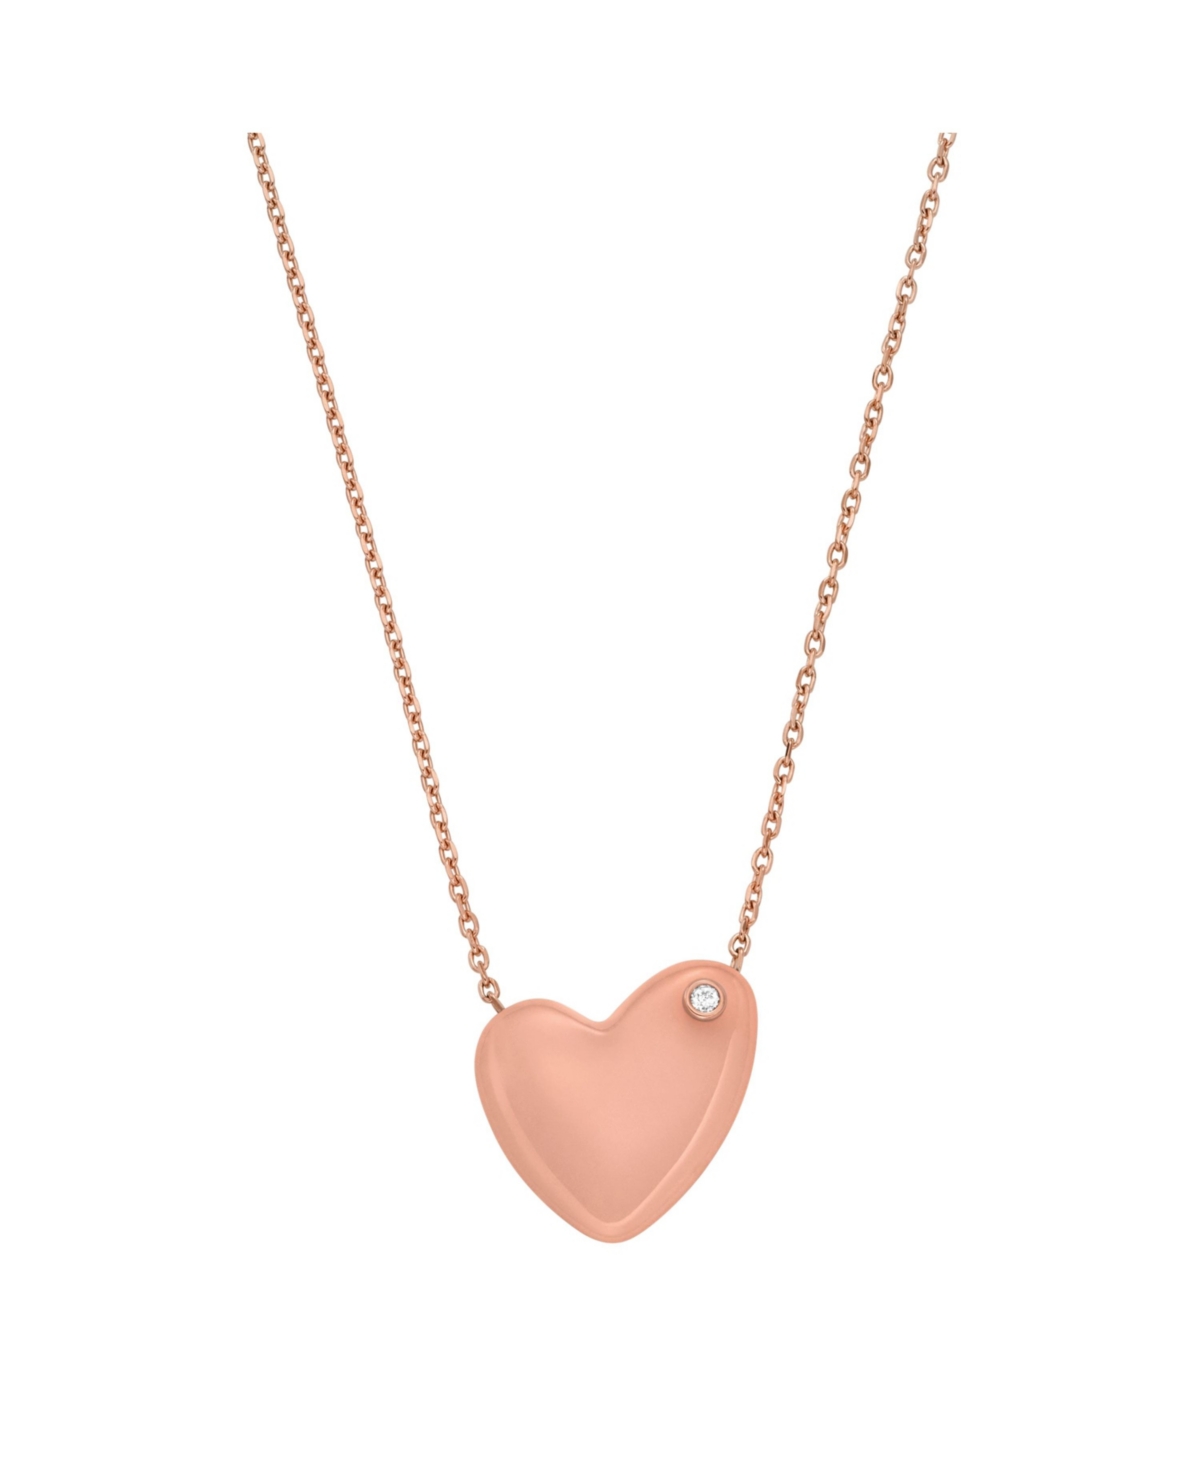 Women's Sofie Sea Glass Pink Heart-Shaped Pendant Necklace, SKJ1803791 - Rose Gold